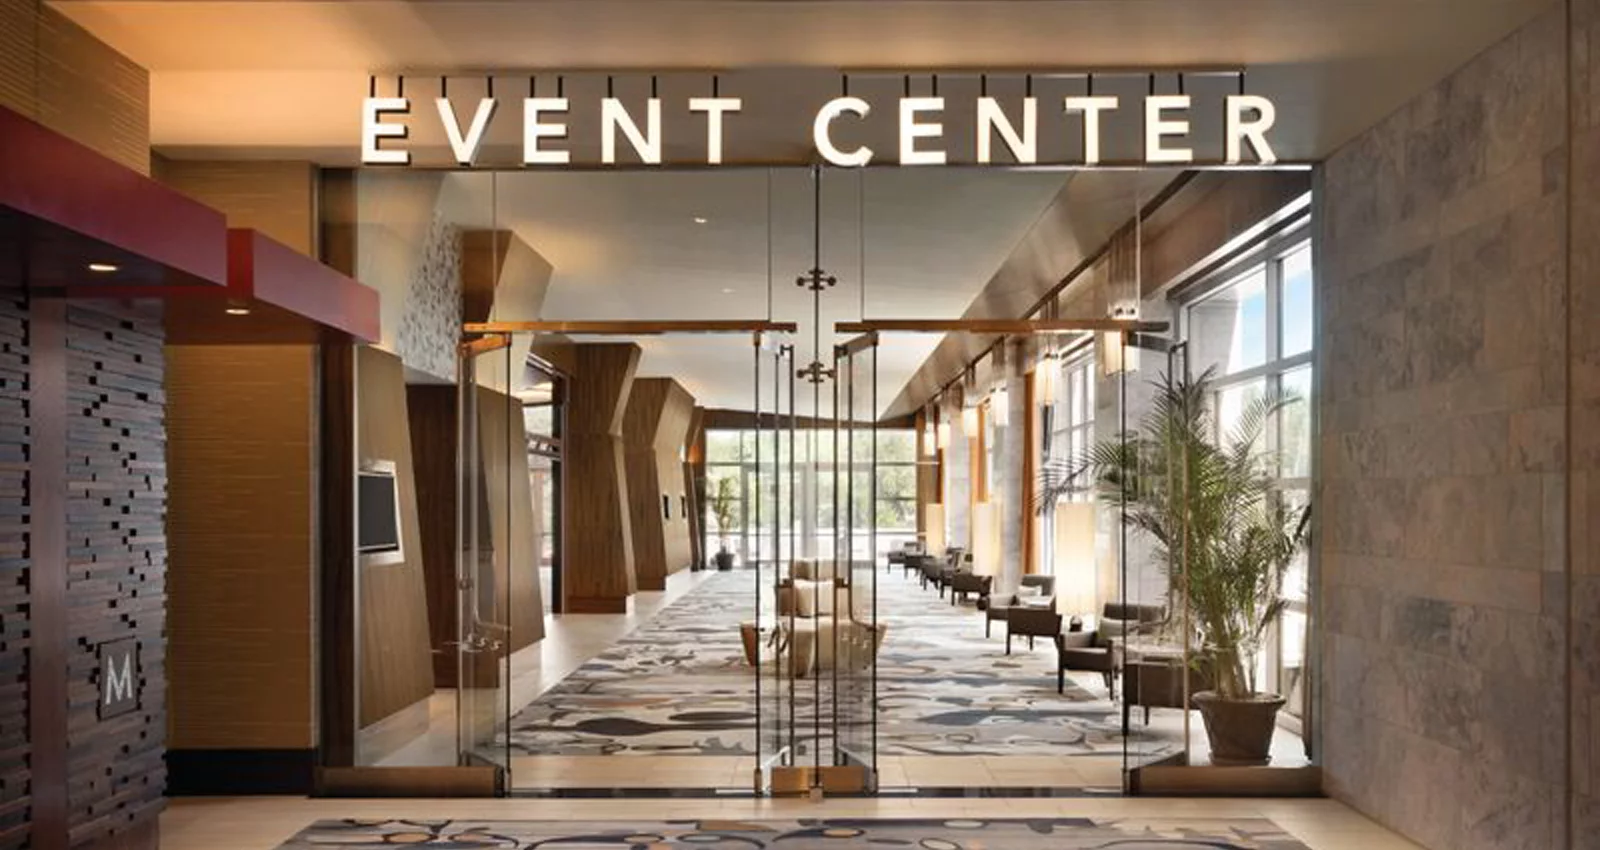 The Event Center at Rivers Casino & Resort. | Photo Courtesy of Rivers Casino & Resort